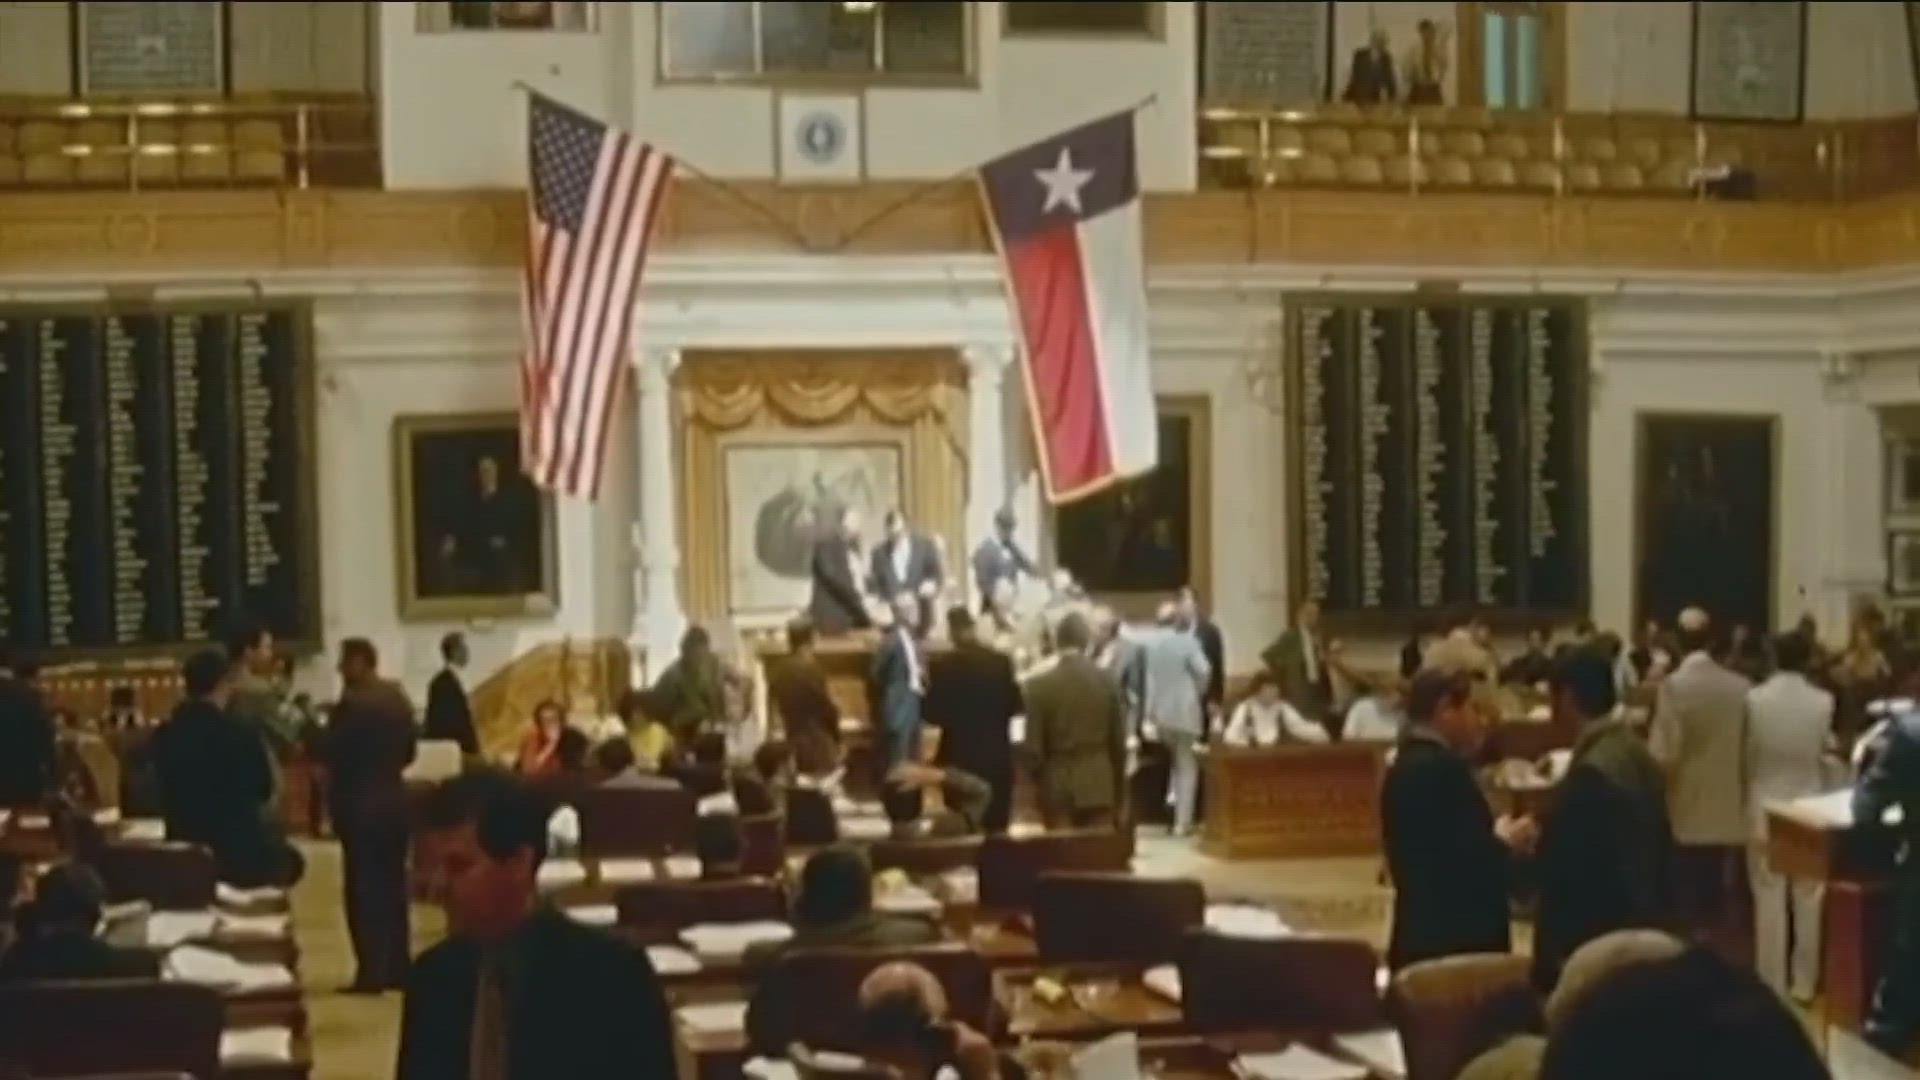 The Texas Legislature has only impeached two elected officials, earmarking the extraordinary territory the Ken Paxton impeachment puts the state in.